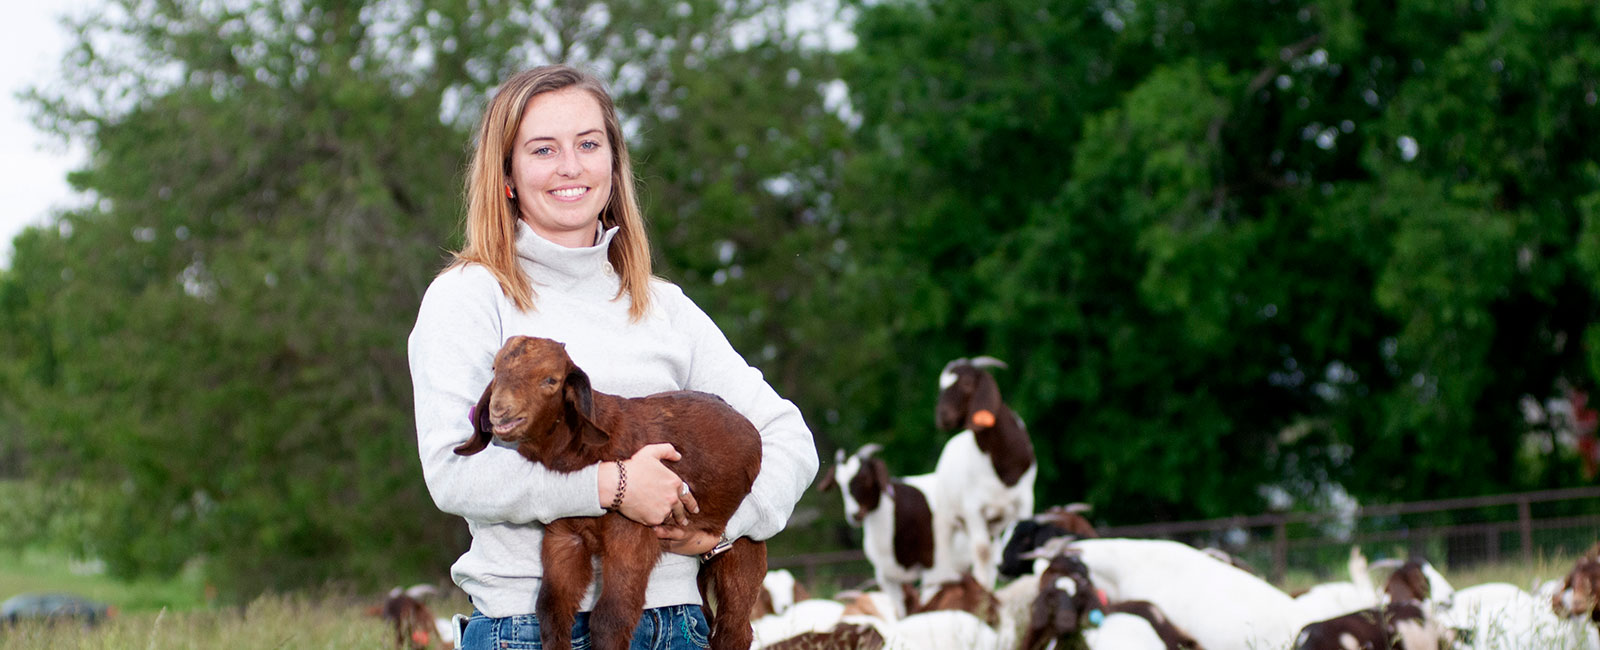 Instructor Alison Crane holds a young goat in a field while other goats gather behind her.